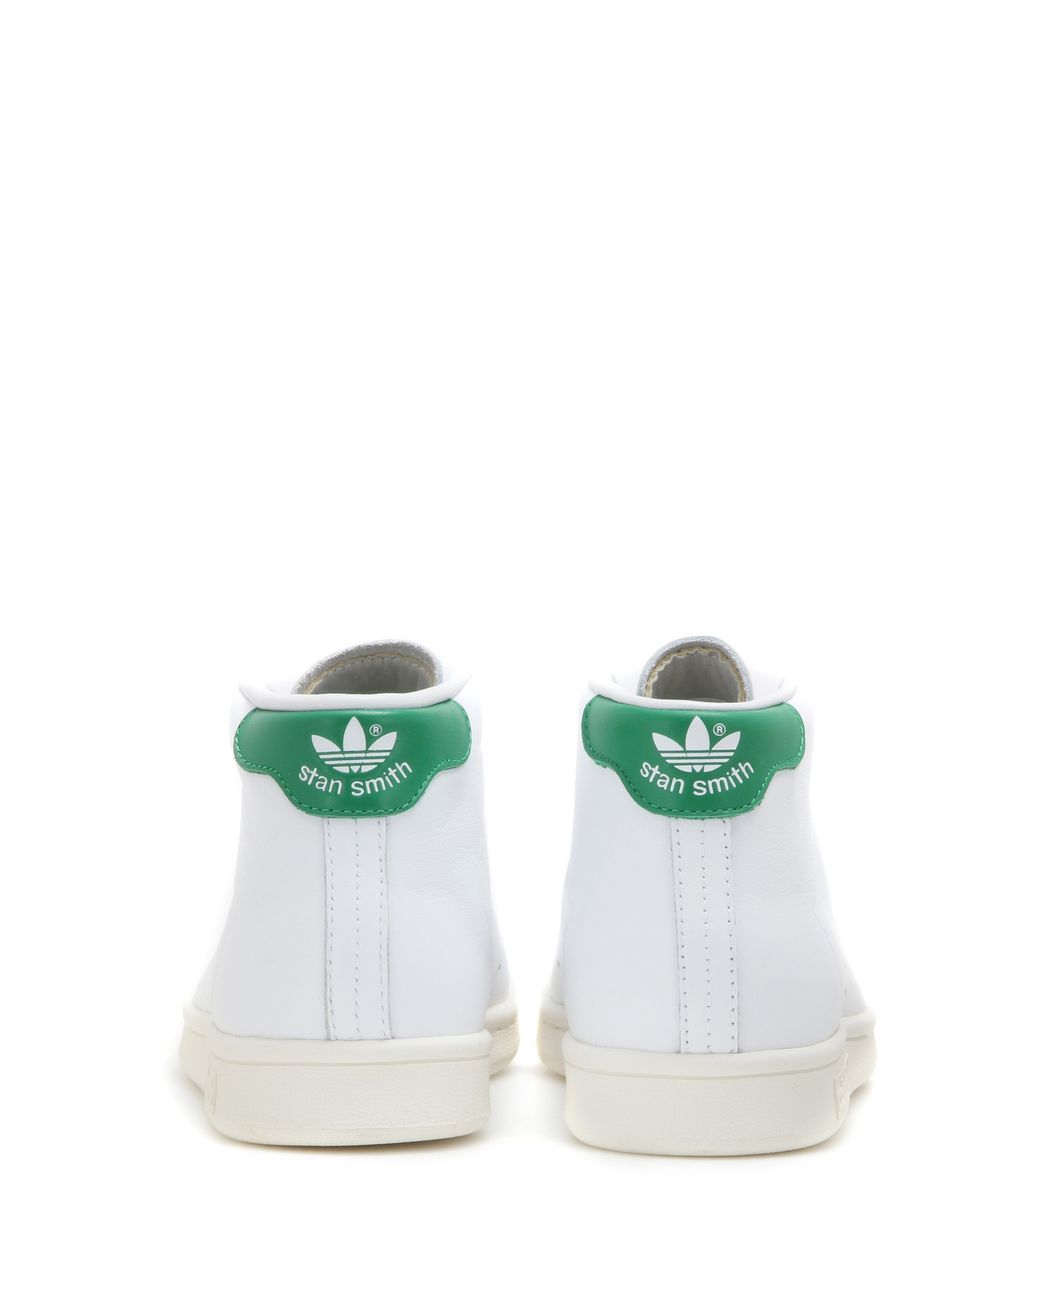 request Expanding pull the wool over eyes adidas stan smith high Costume  Arne lyrics